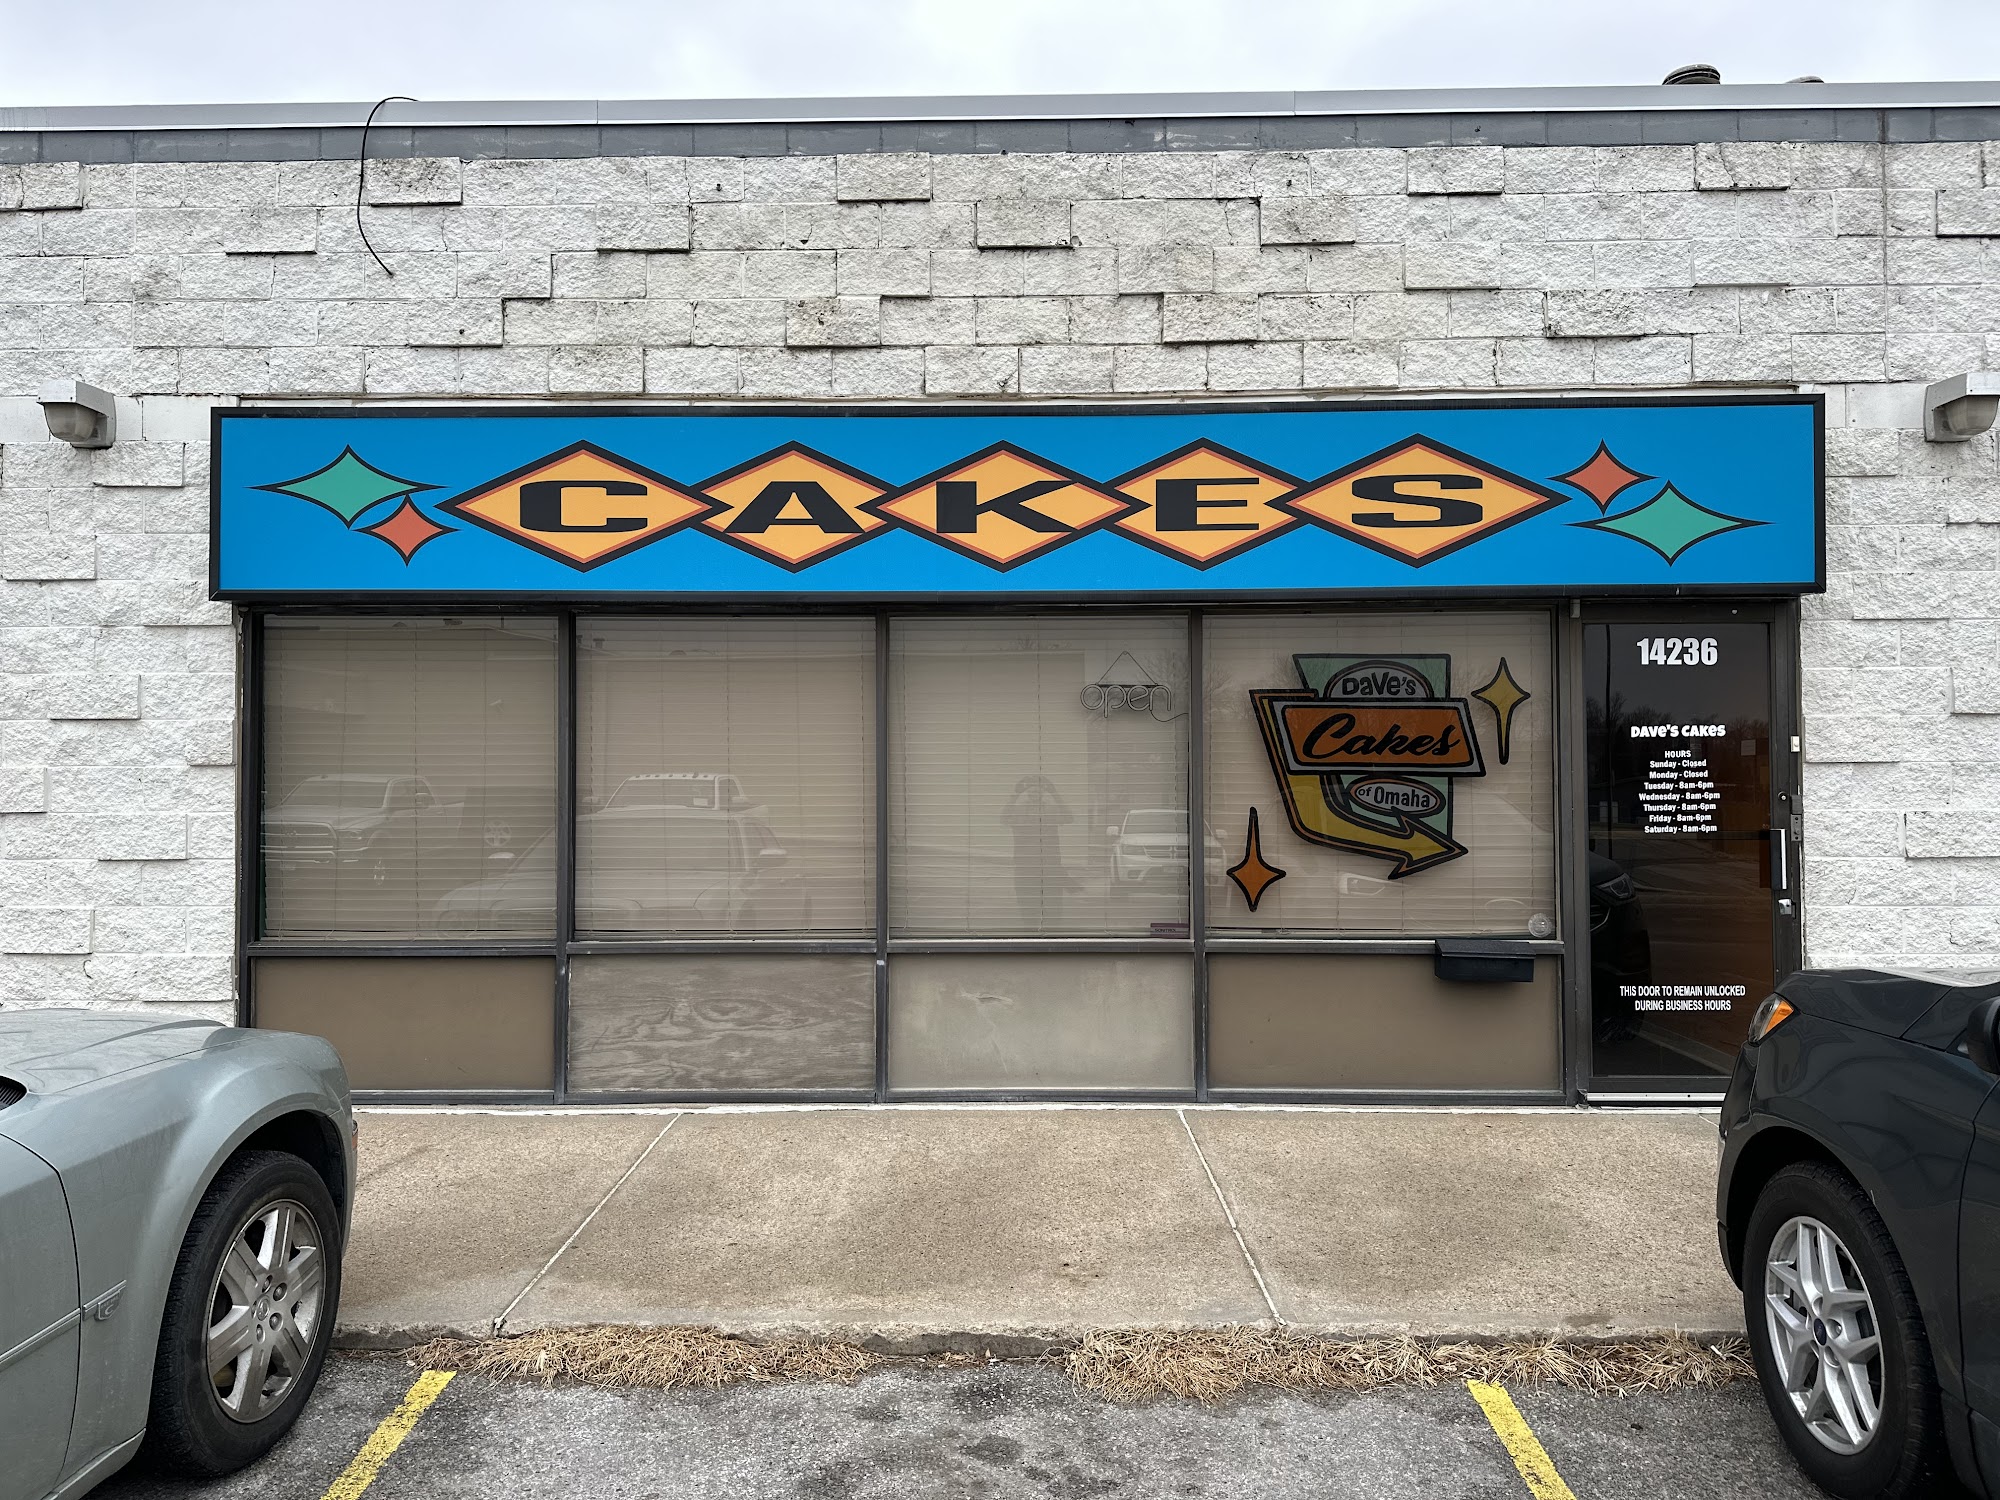 Dave's Cakes of Omaha